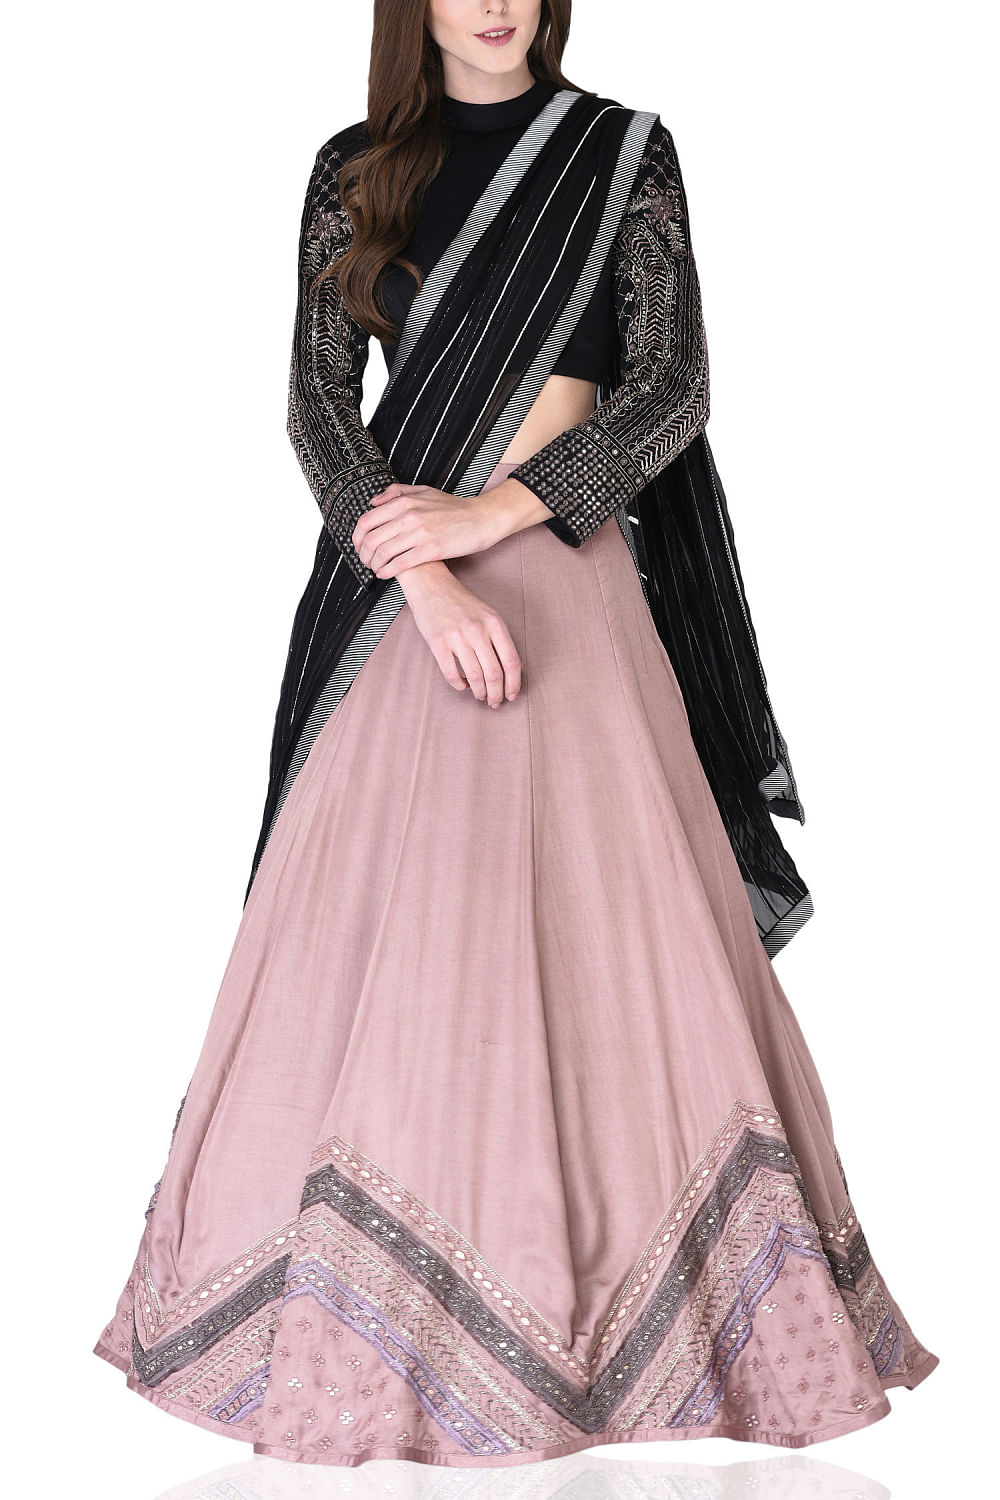 Buy Pink & Green Embroidered Semi-Stitched Myntra Lehenga & Unstitched  Blouse with Dupatta Online from EthnicPlus for ₹5699